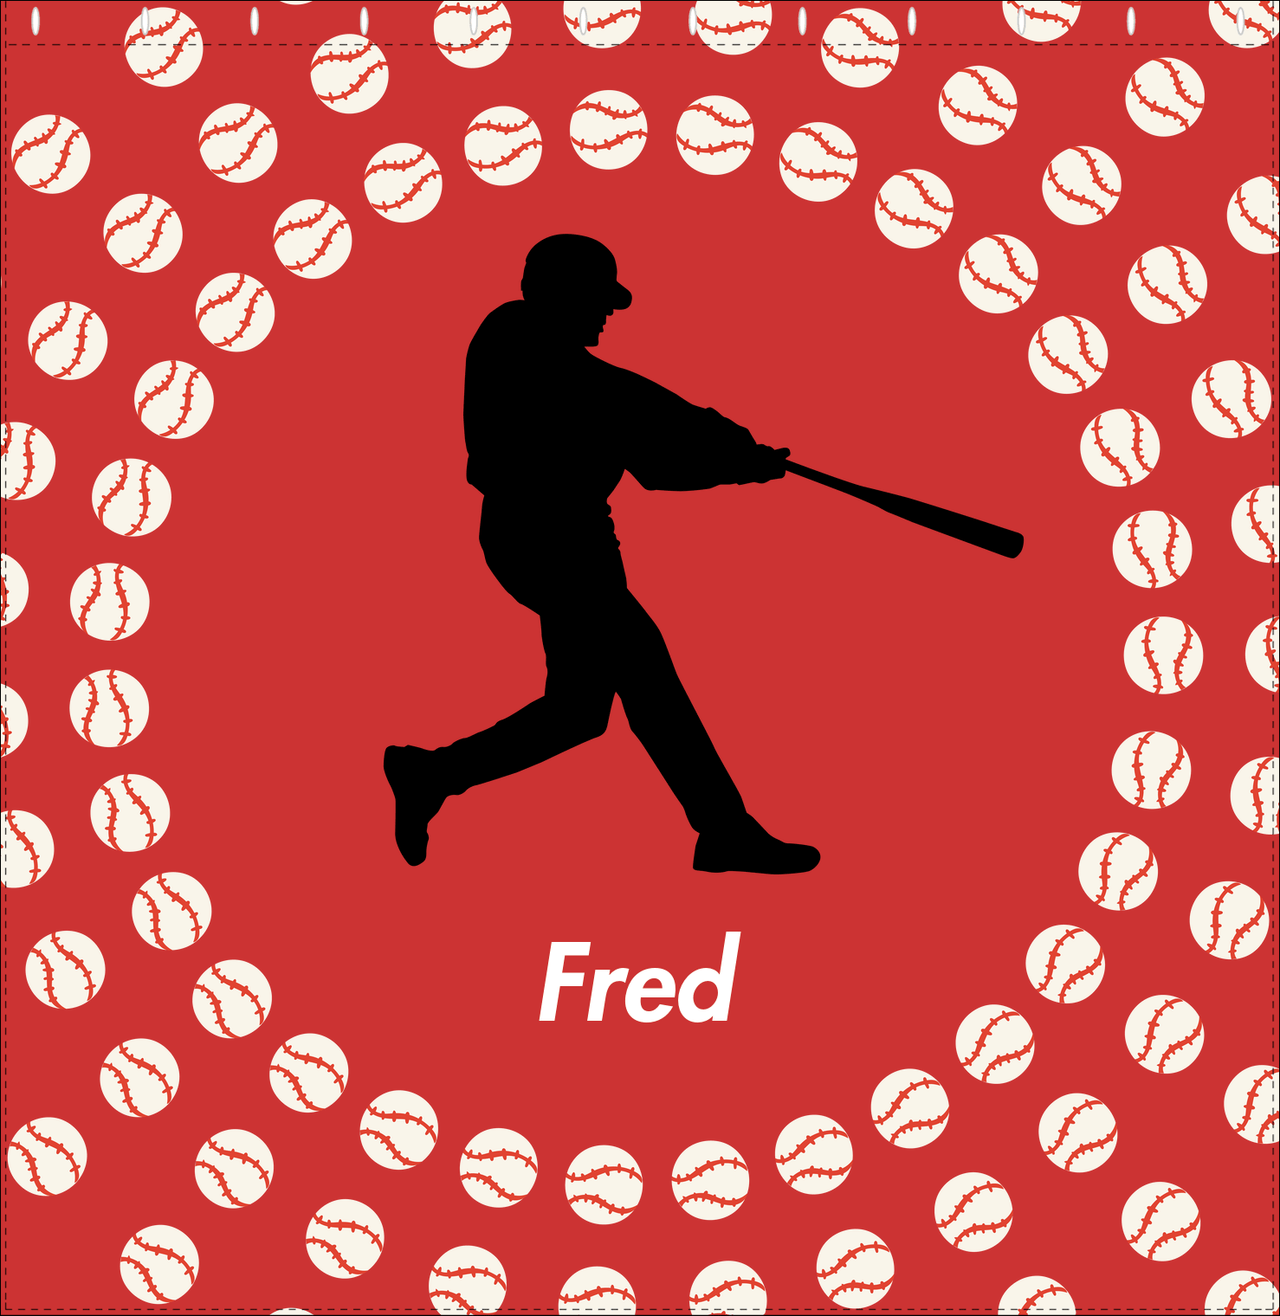 Personalized Baseball Shower Curtain XLII - Red Background - Silhouette VI - Decorate View